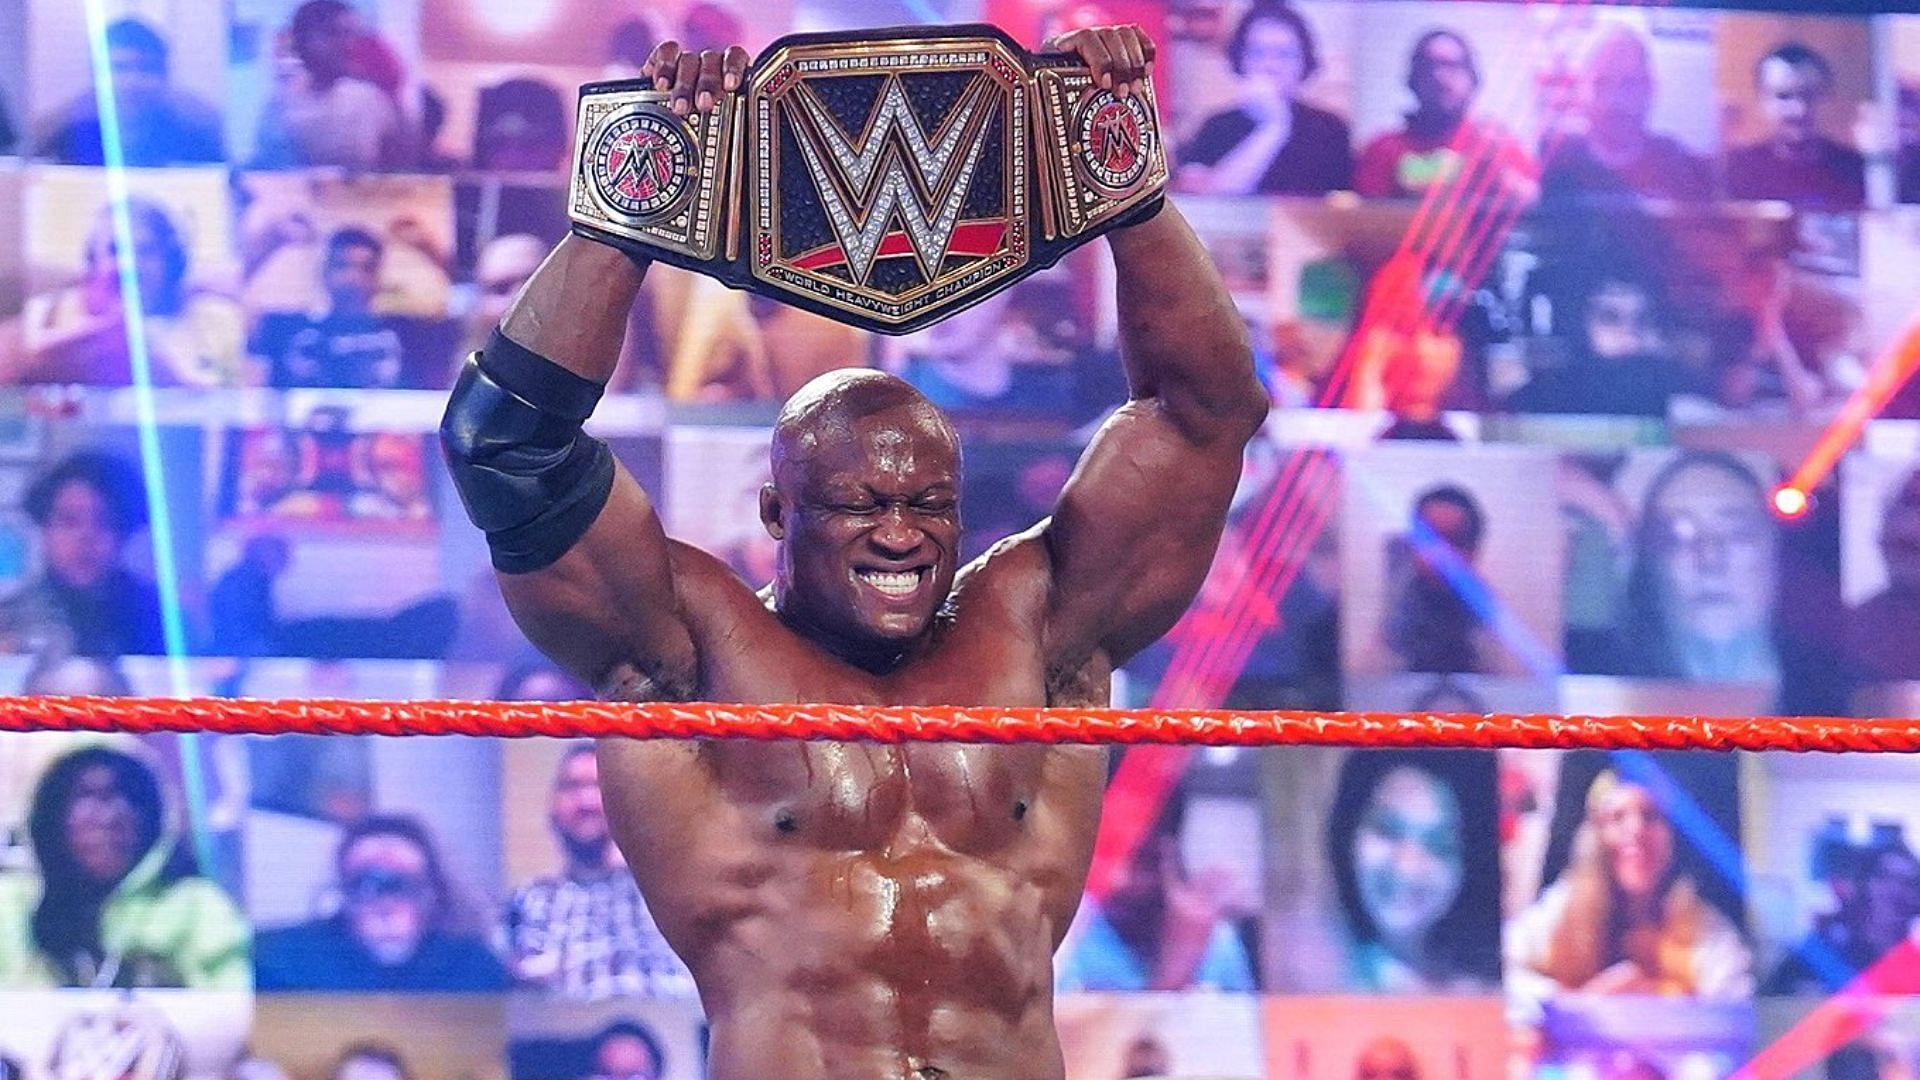 Bobby Lashley won the WWE Championship for the first time in his career in 2021.